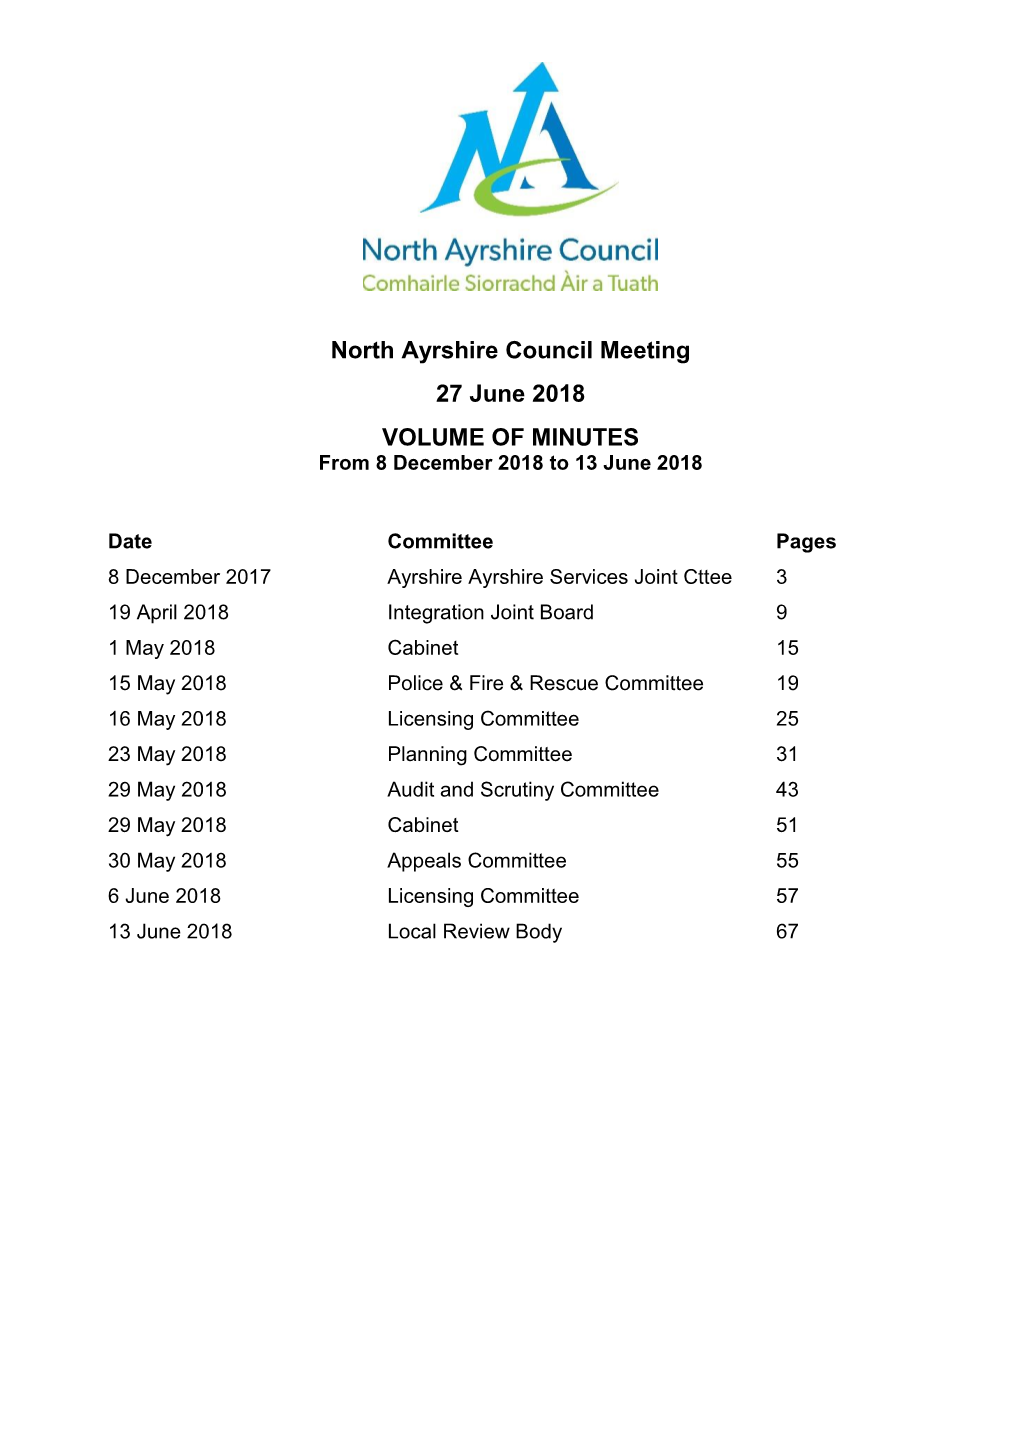 North Ayrshire Council Meeting 27 June 2018 VOLUME of MINUTES from 8 December 2018 to 13 June 2018